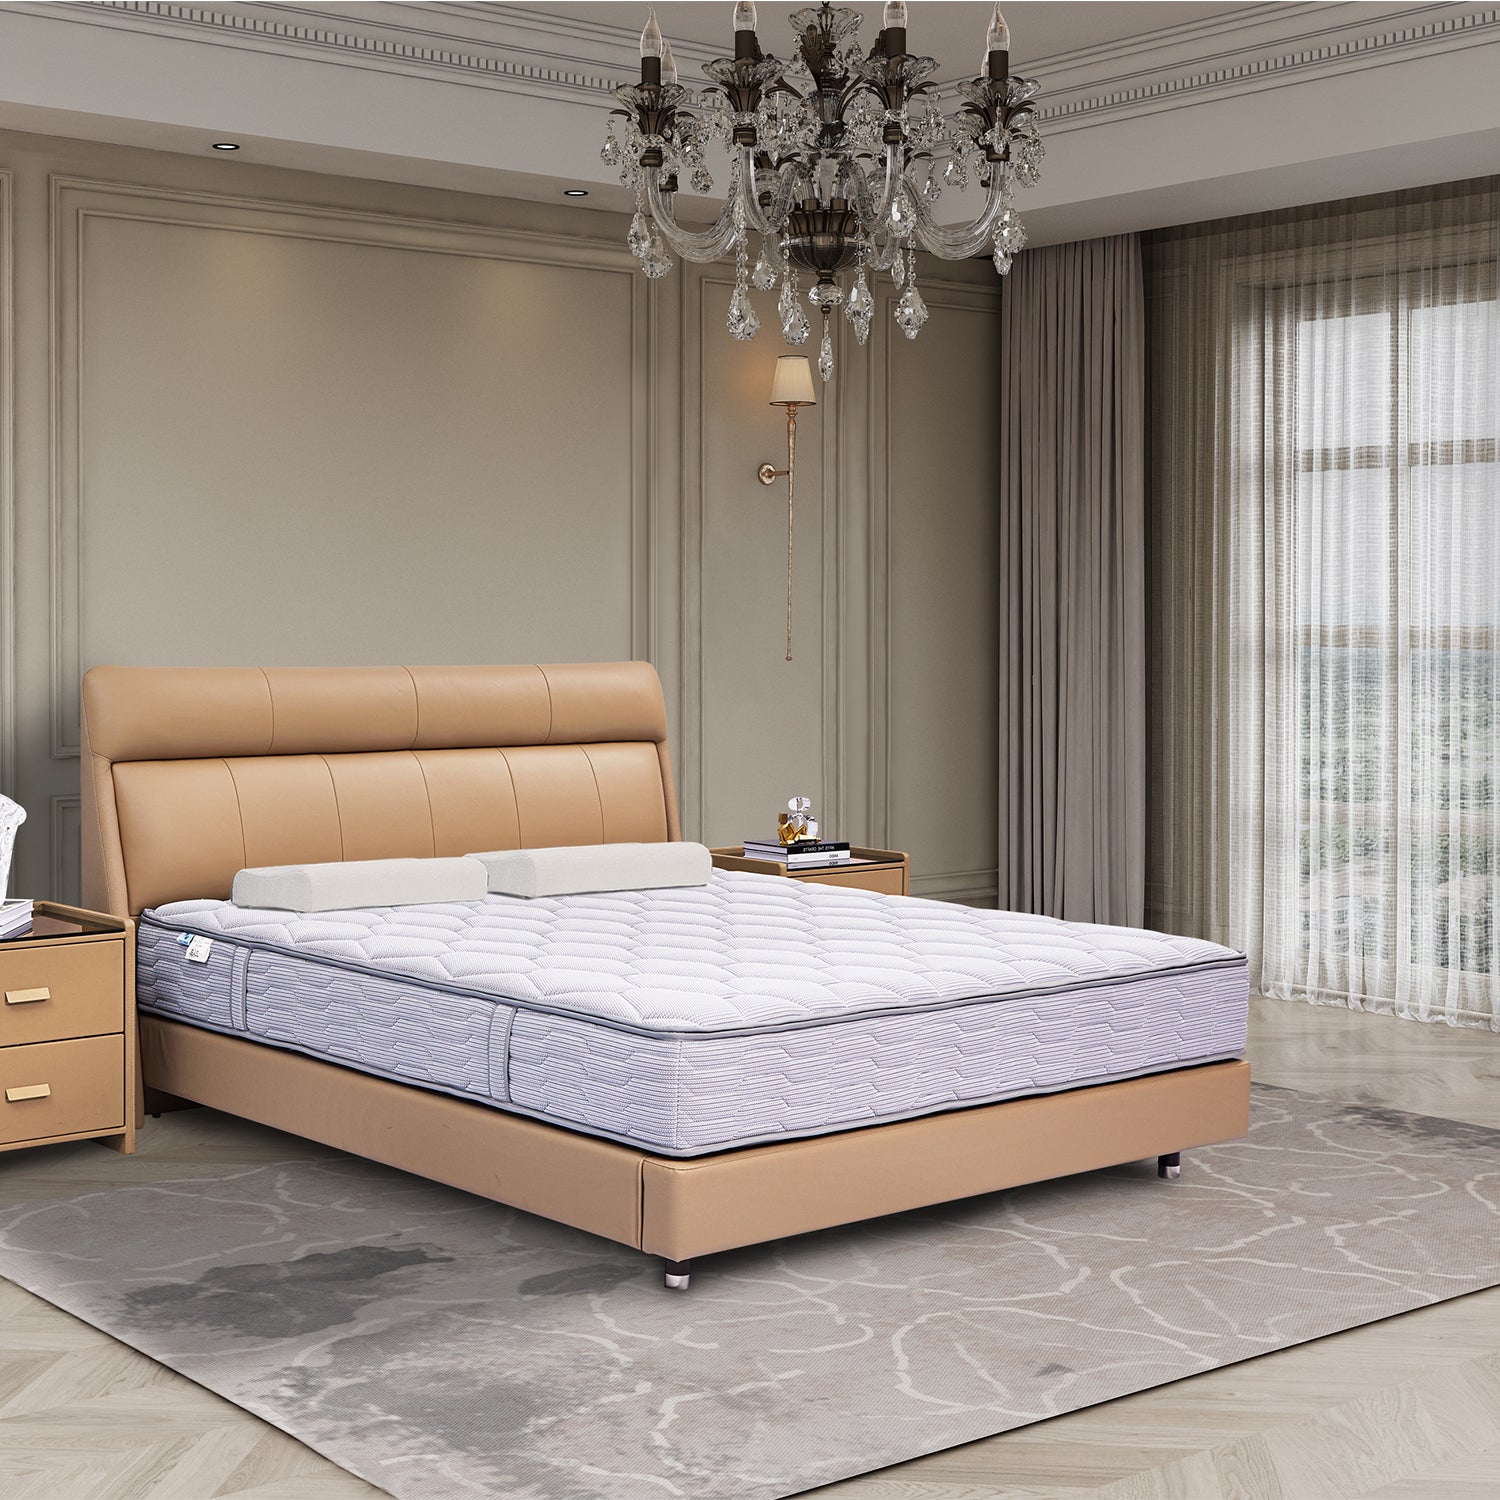 DeRUCCI Bed Frame BOC1 - 011 in beige leather with a white mattress in a modern bedroom with wooden nightstands, chandelier, and grey patterned rug.